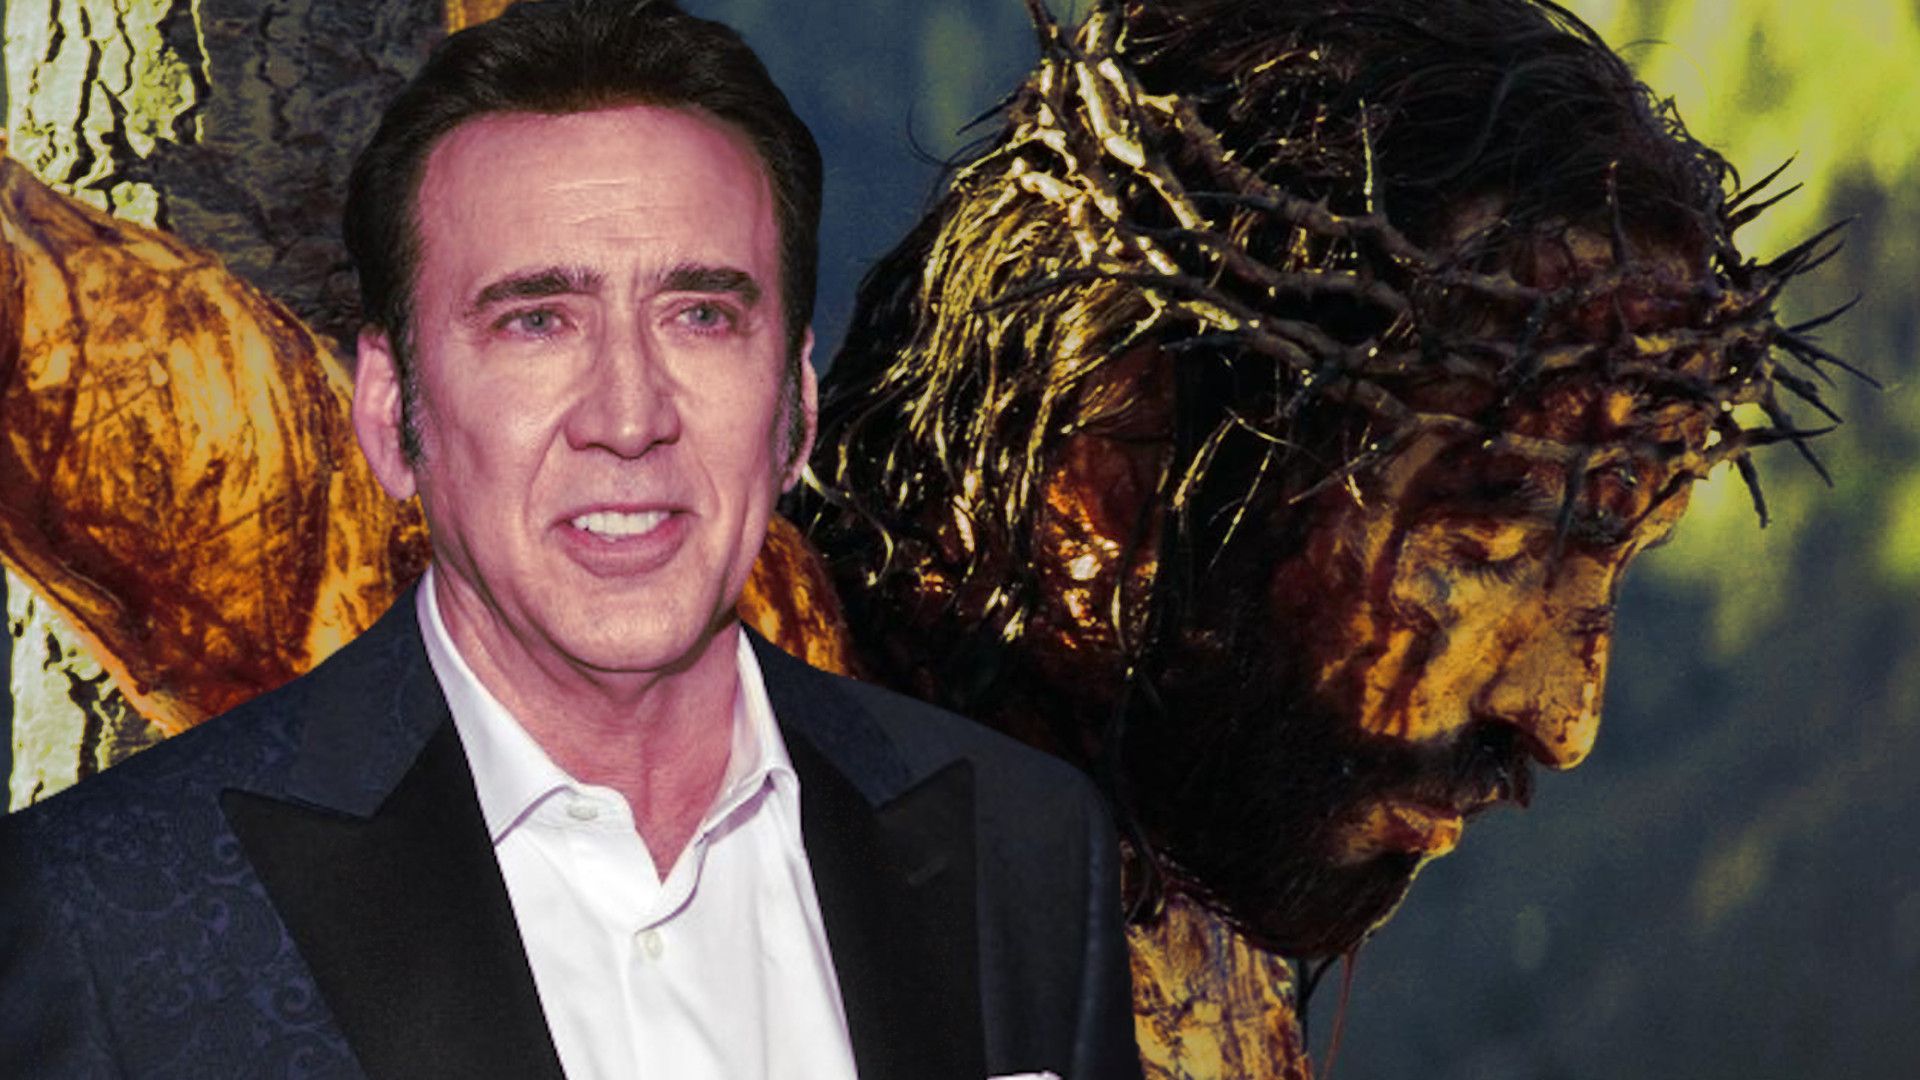 Nicolas Cage over an image of Jim Caviezel as Jesus in The Passion of the Christ